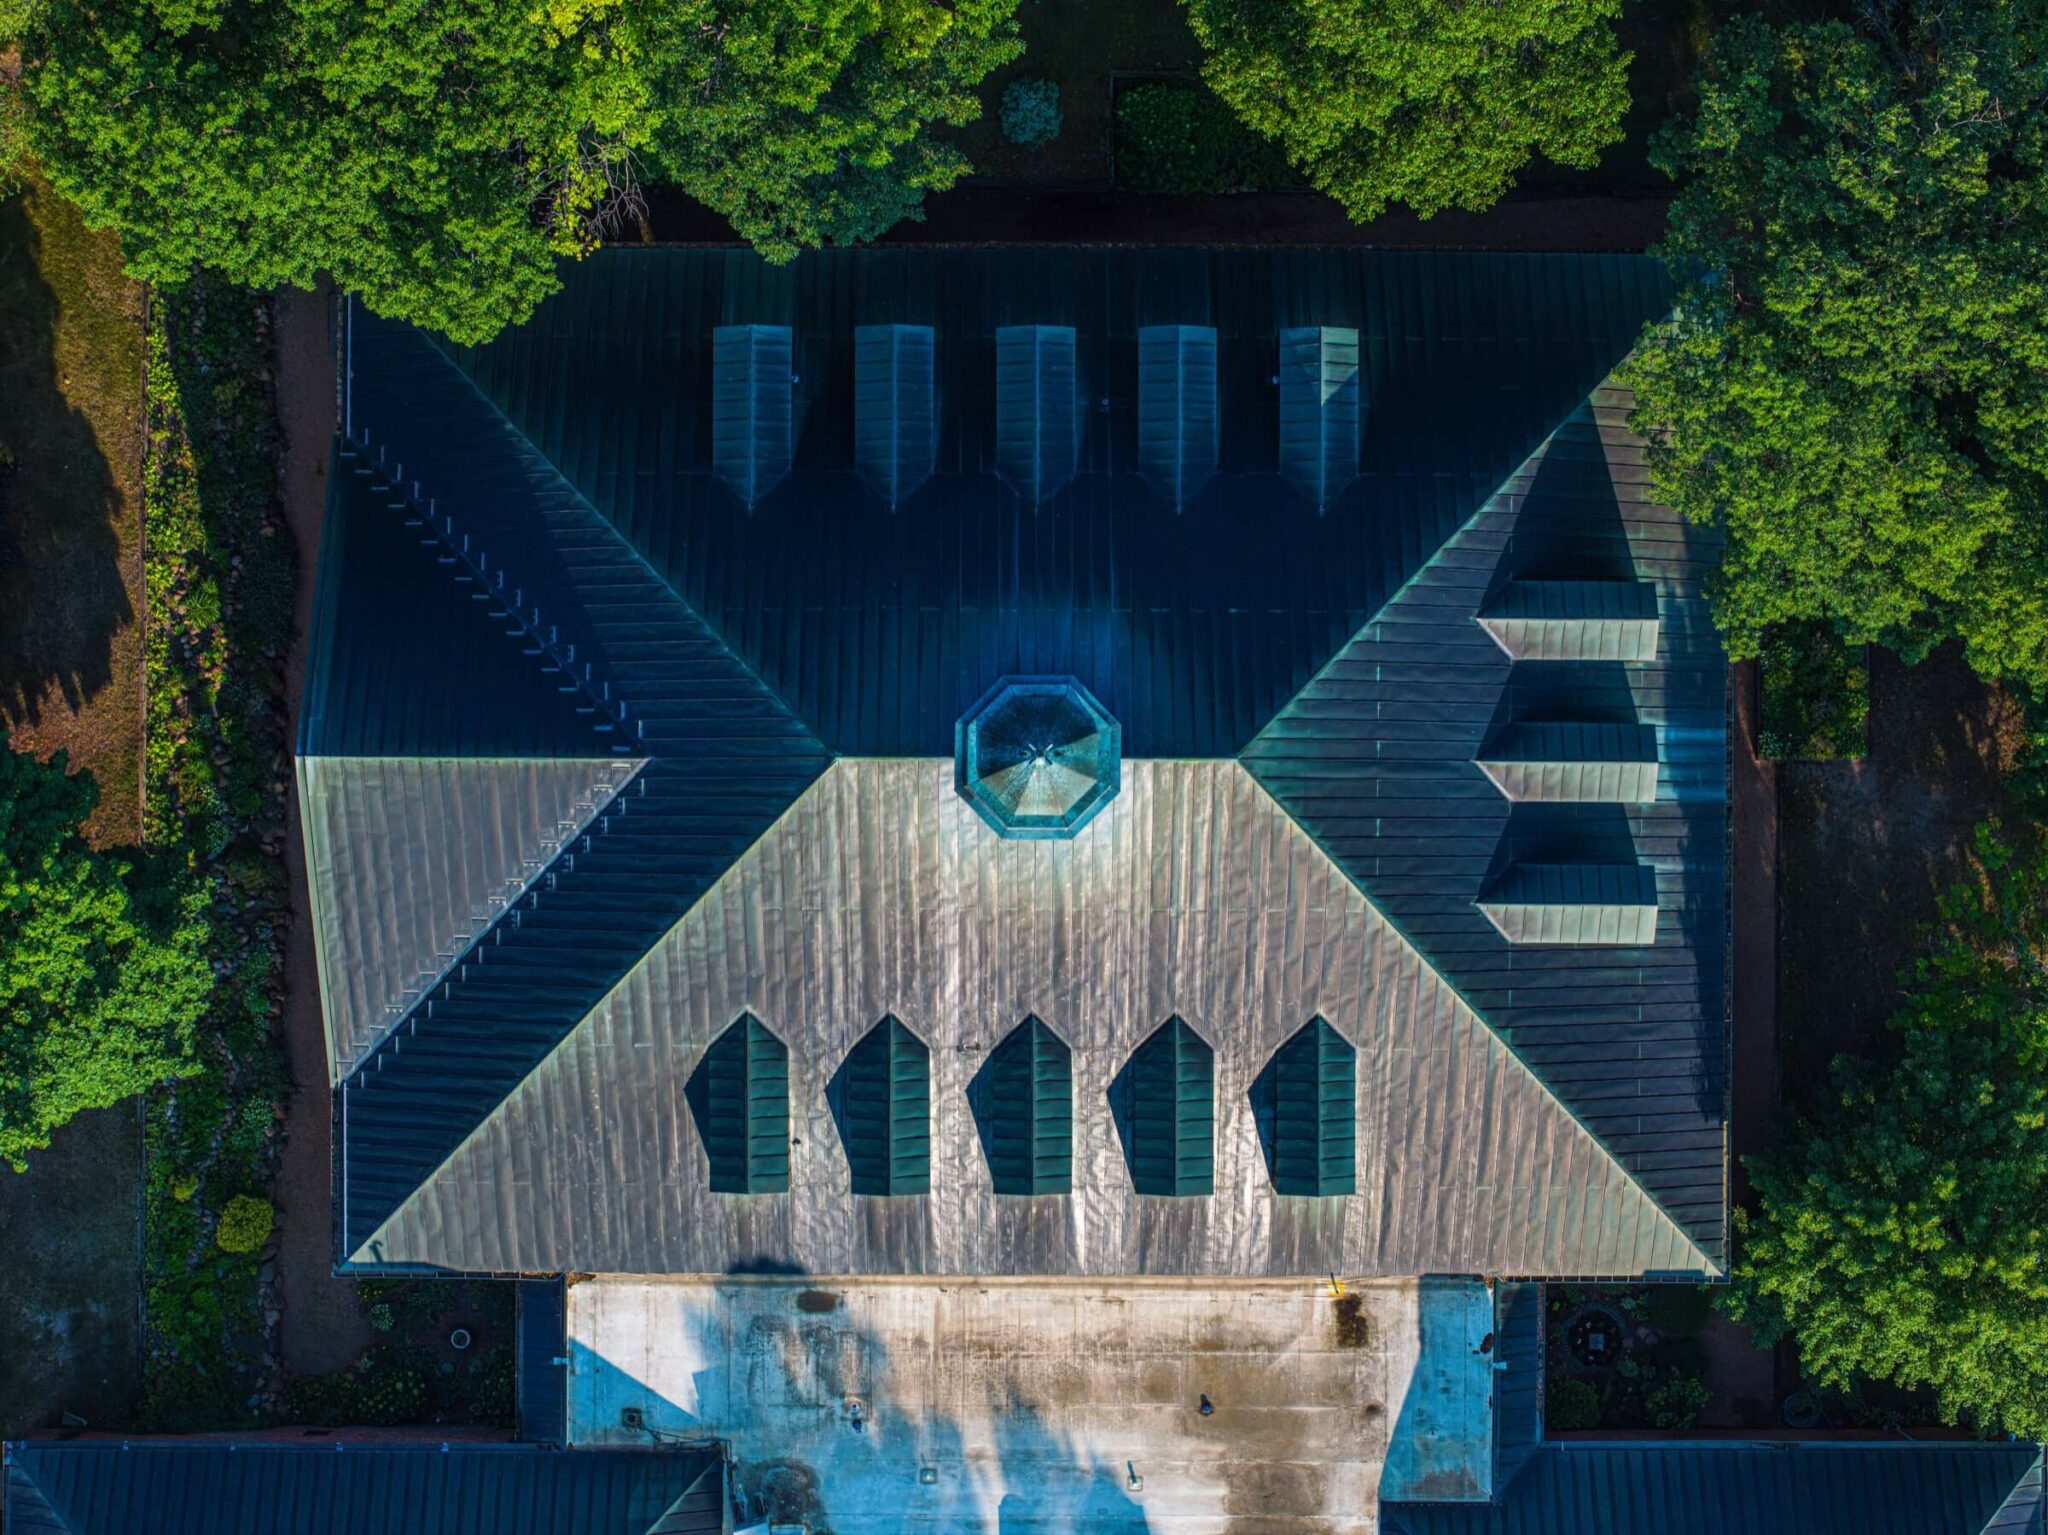 Aerial view looking directly down over a church's roof